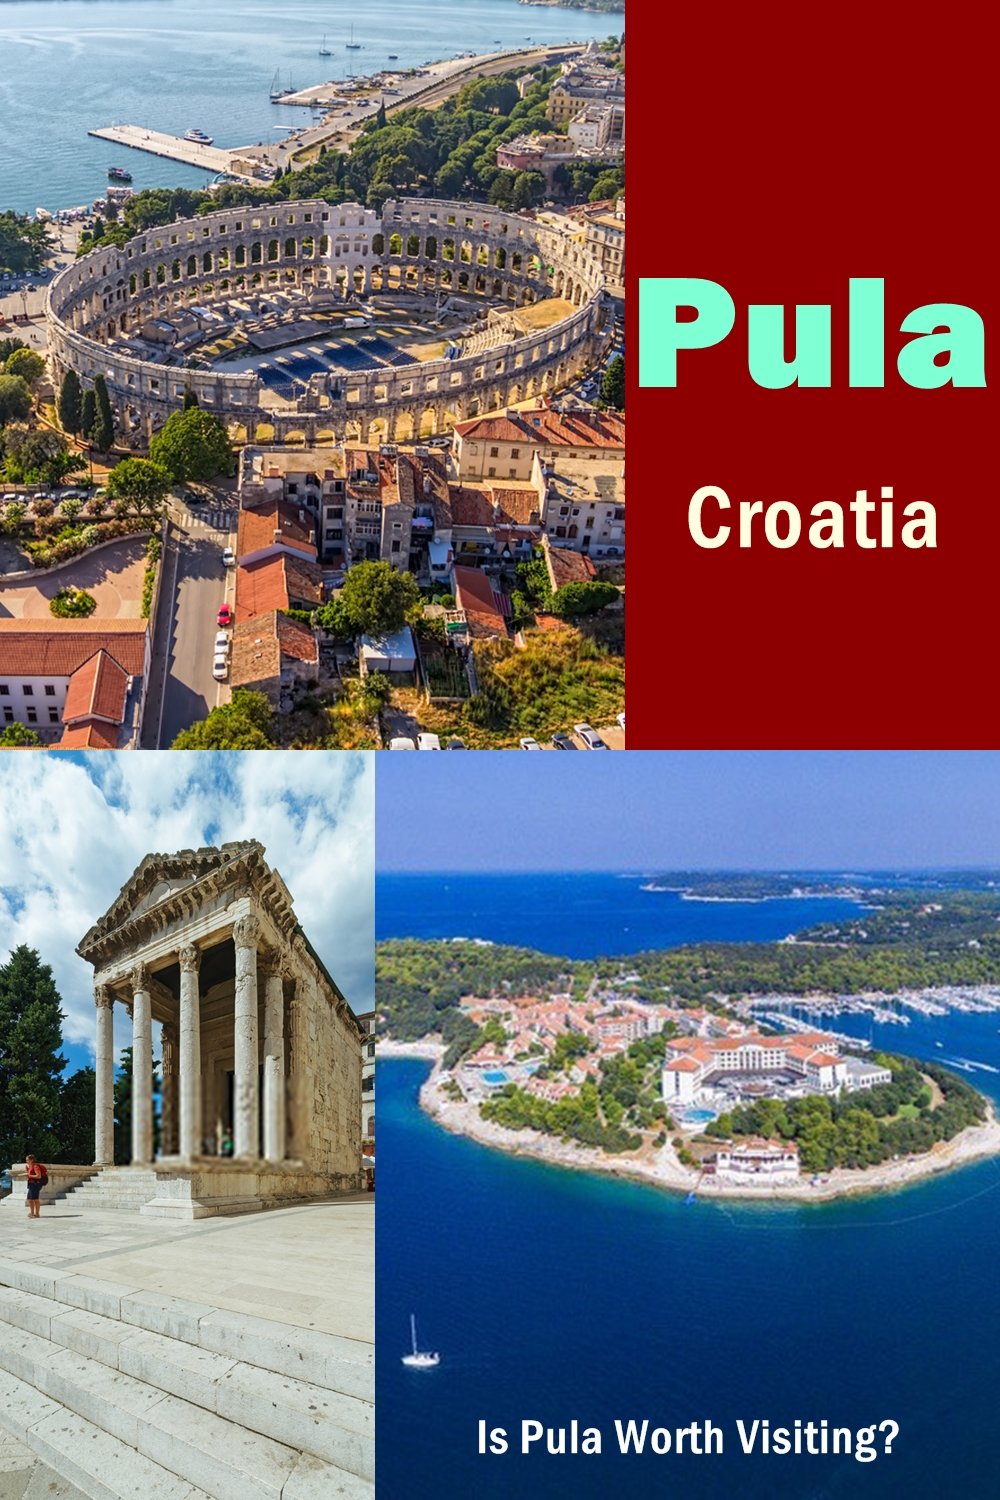 Pula Guide - the Arena, Airport, Beaches, Hotels